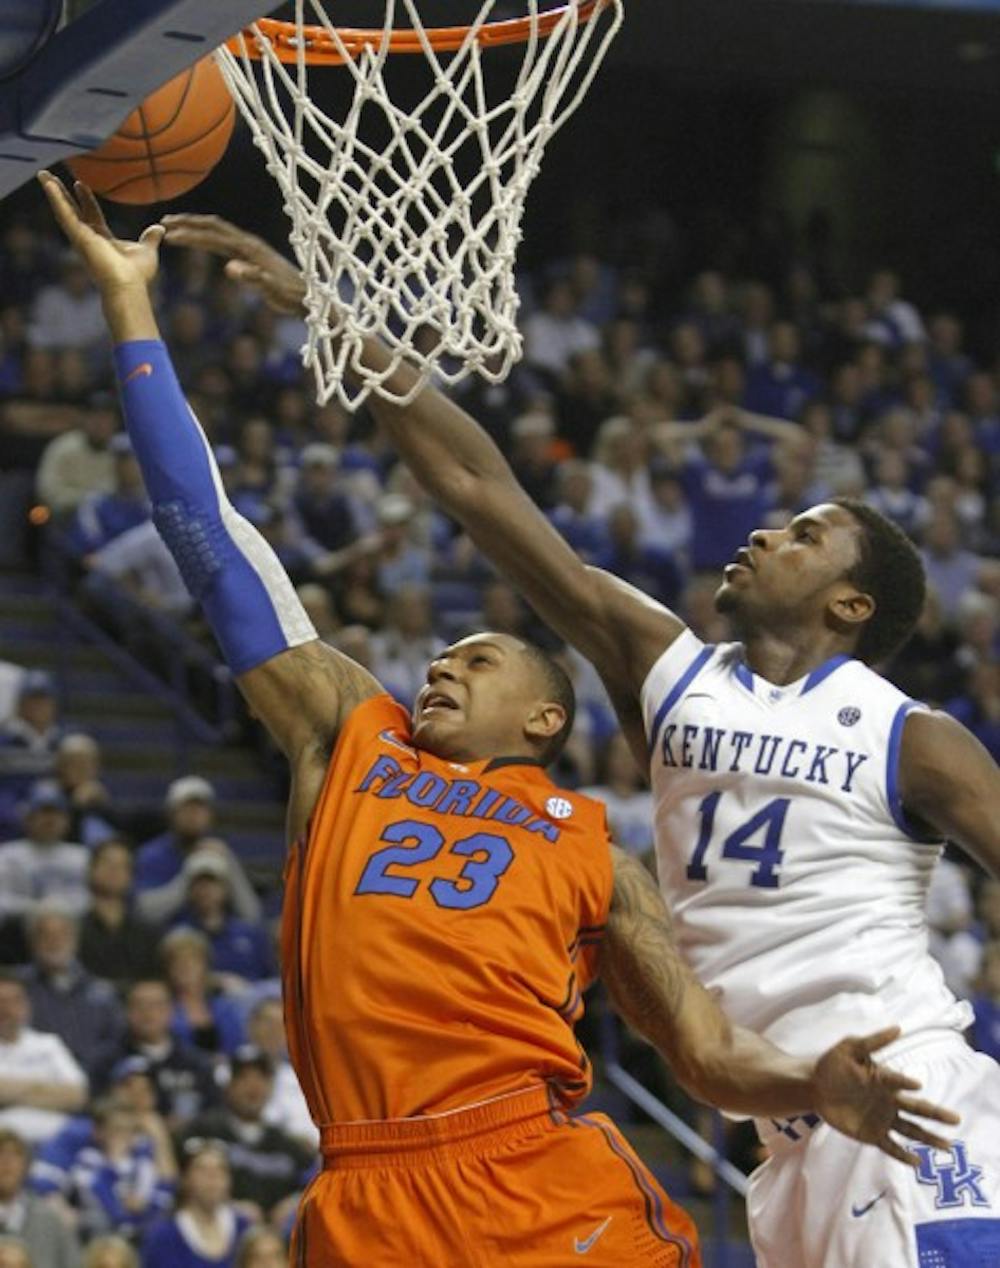 <p align="justify"><span lang="EN" xml:lang="EN">Florida freshman</span></p>
<p><span lang="EN" xml:lang="EN">Brad Beal (left) credited Kentucky for shutting down the Gators’</span></p>
<p><span lang="EN" xml:lang="EN">strength on offense — 3-point shooting. UF made just 6 of 27</span></p>
<p><span lang="EN" xml:lang="EN">attempts from three in the 78-58 loss.</span></p>